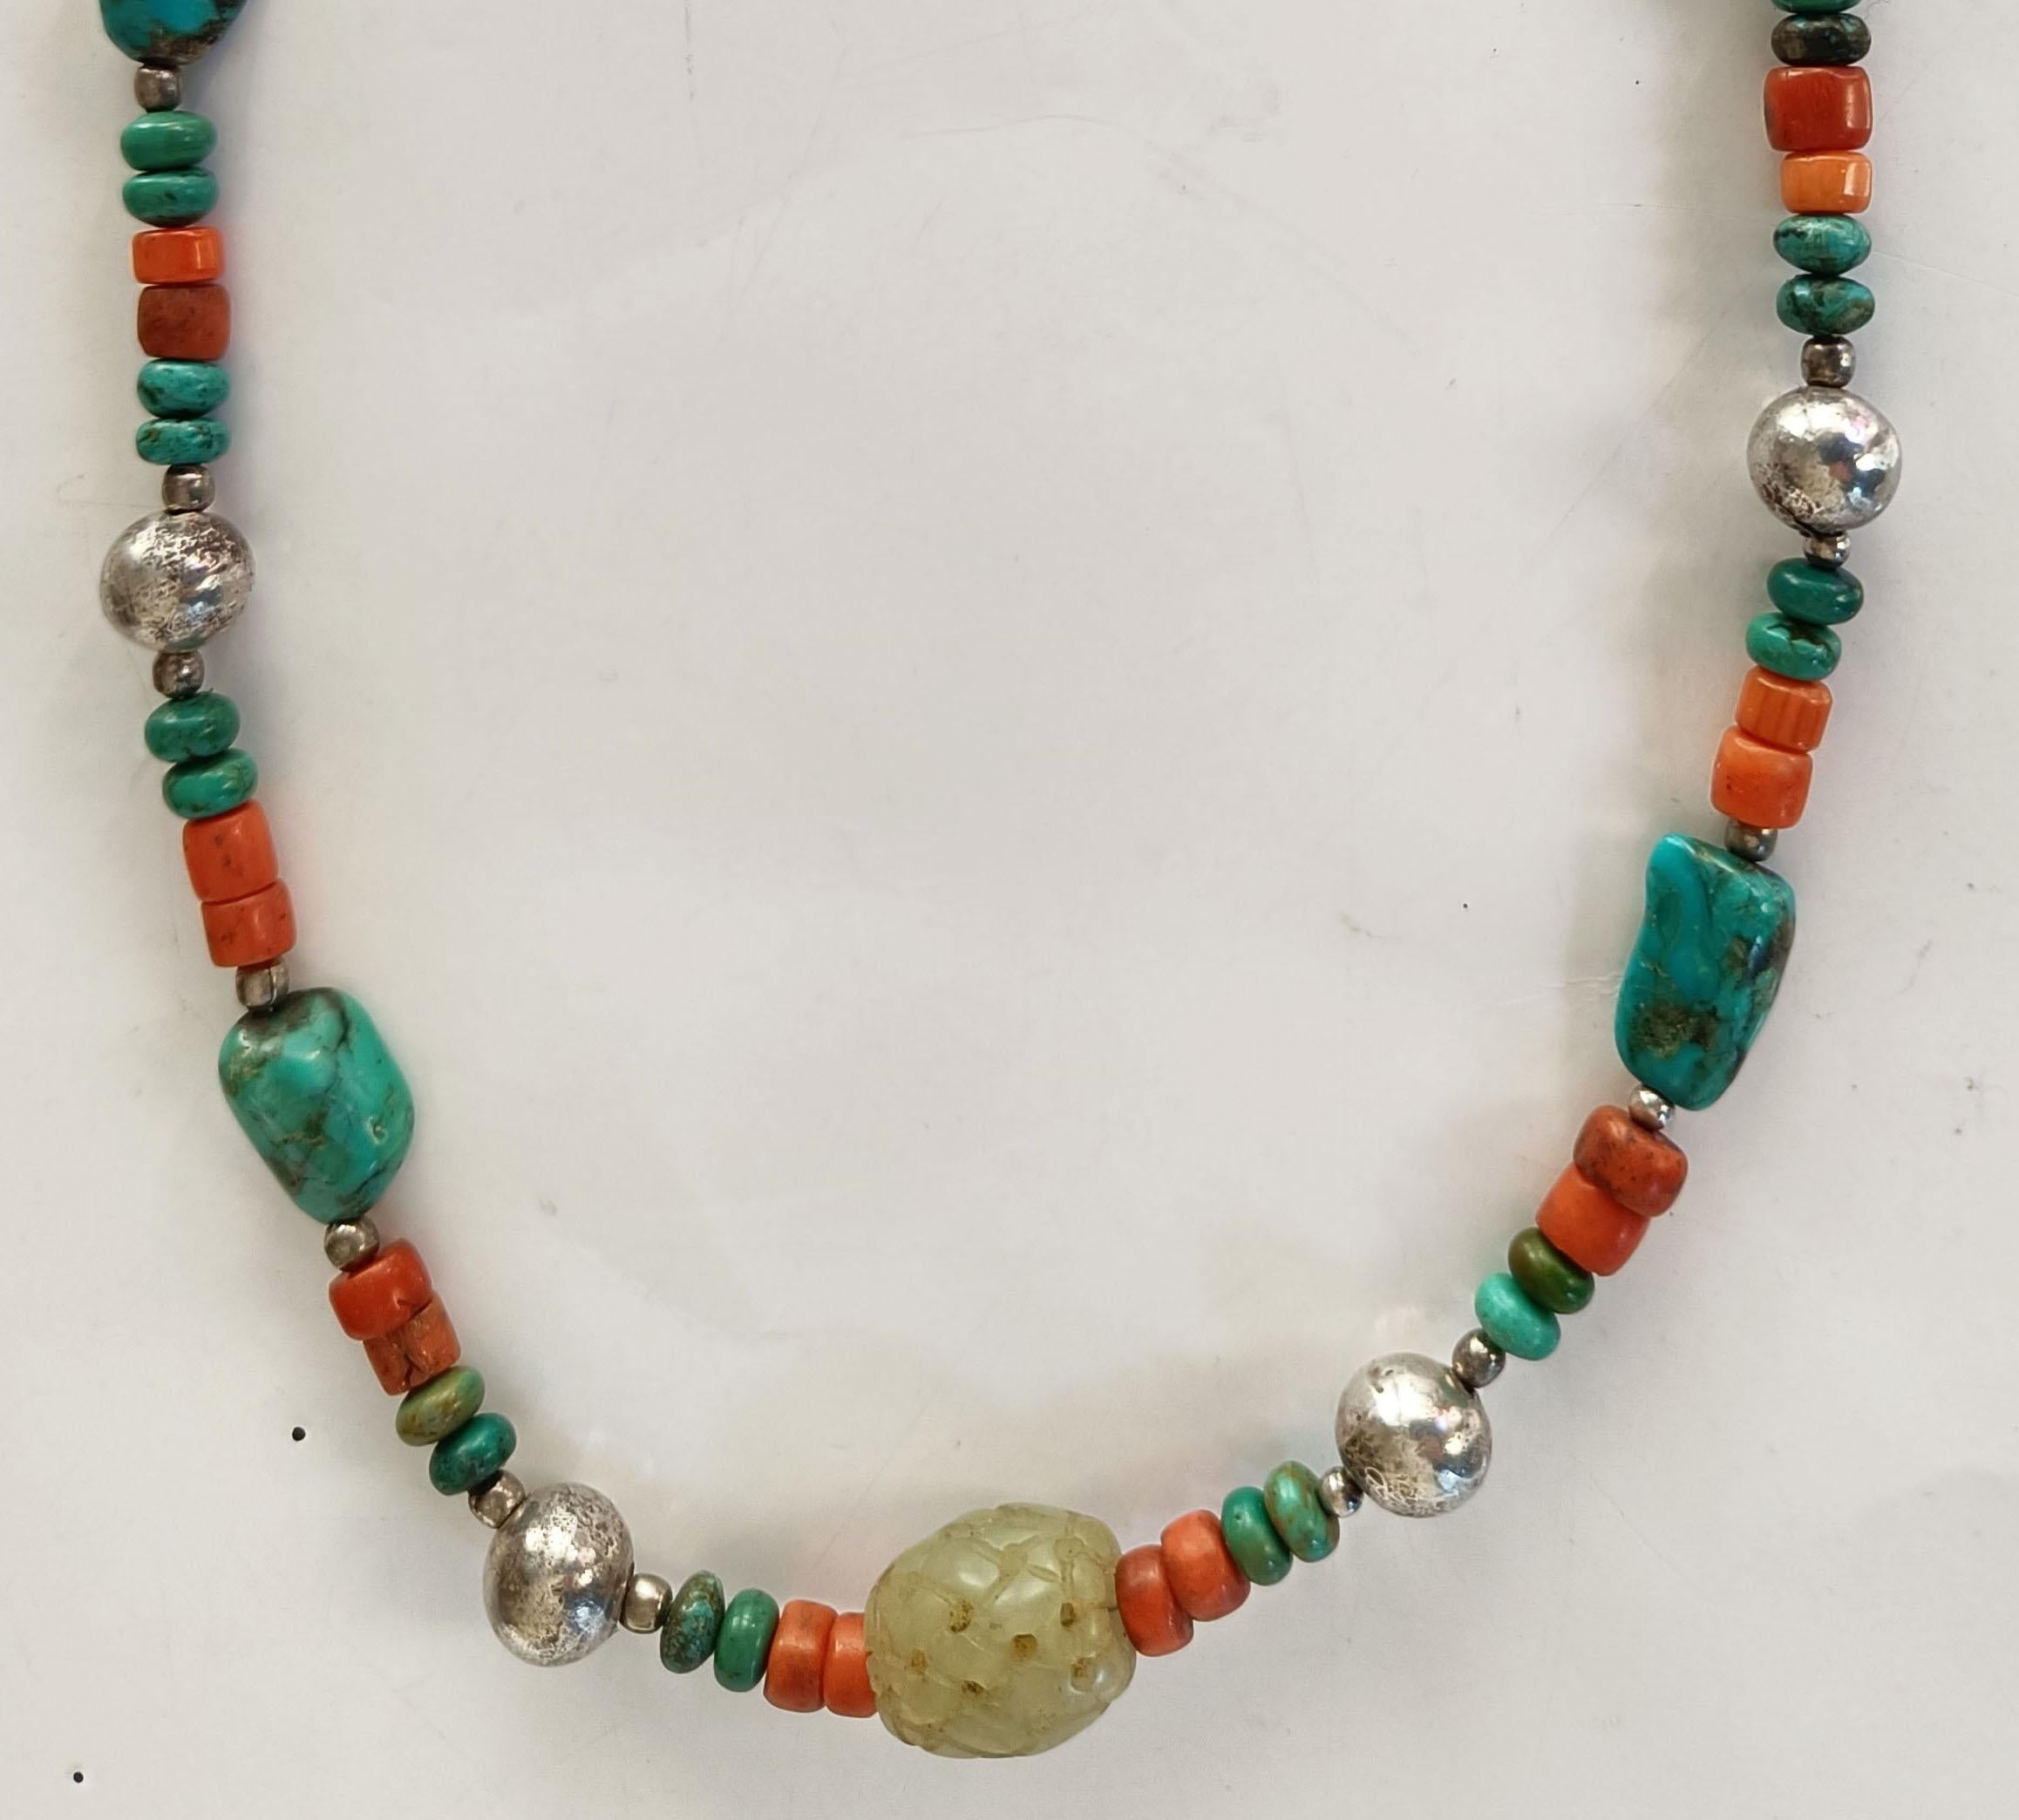 A fine Chinese Ethnic Minority antique turquoise jade coral silver necklace from Bai people Yunnan. 
Coral silver turquoise and malachite with rare central carved lattice work jade bead .
Yunnan ethnic minority China
Period 19th century.
Condition: